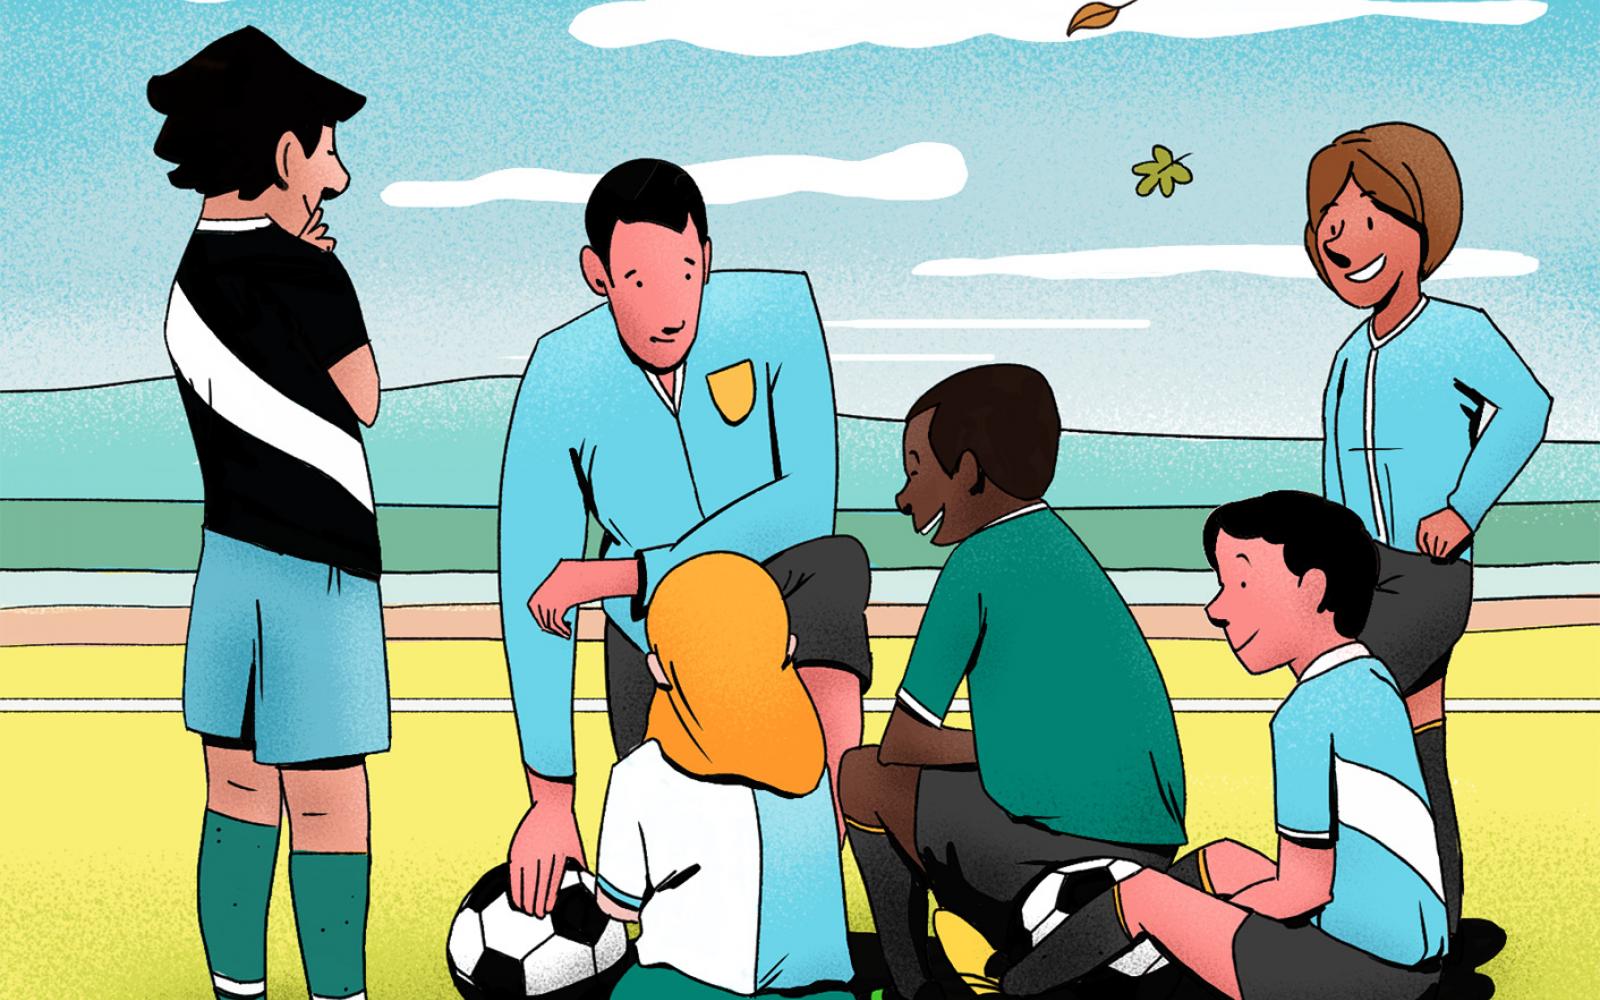 Coach with children - image from the e-learning